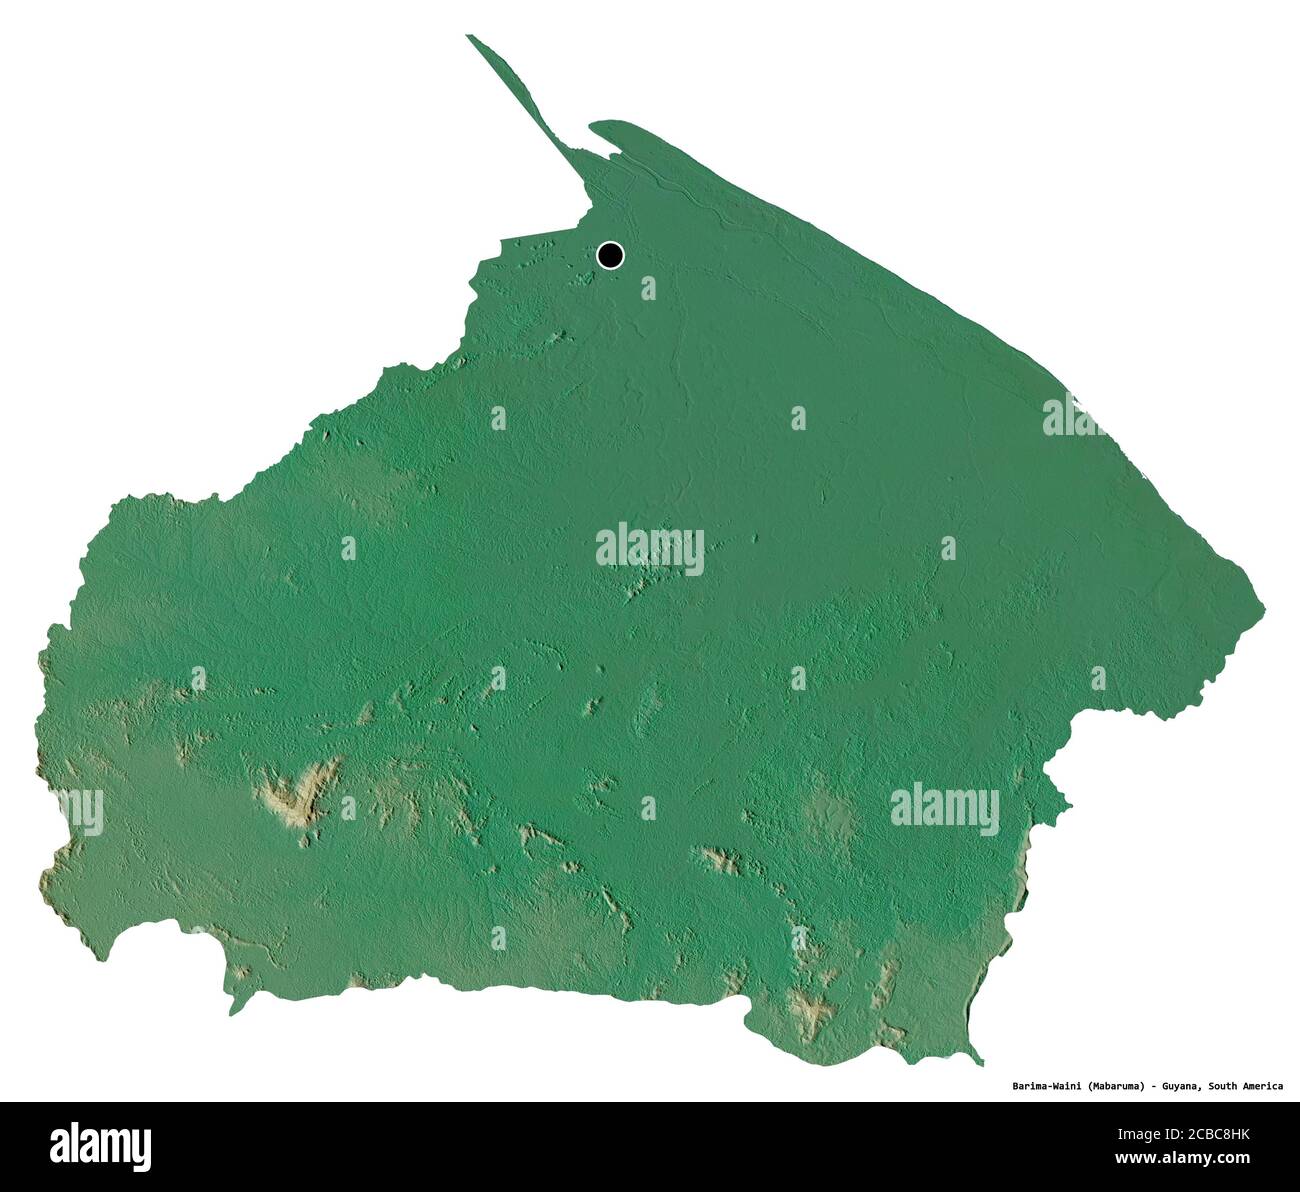 Shape of Barima-Waini, region of Guyana, with its capital isolated on white background. Topographic relief map. 3D rendering Stock Photo